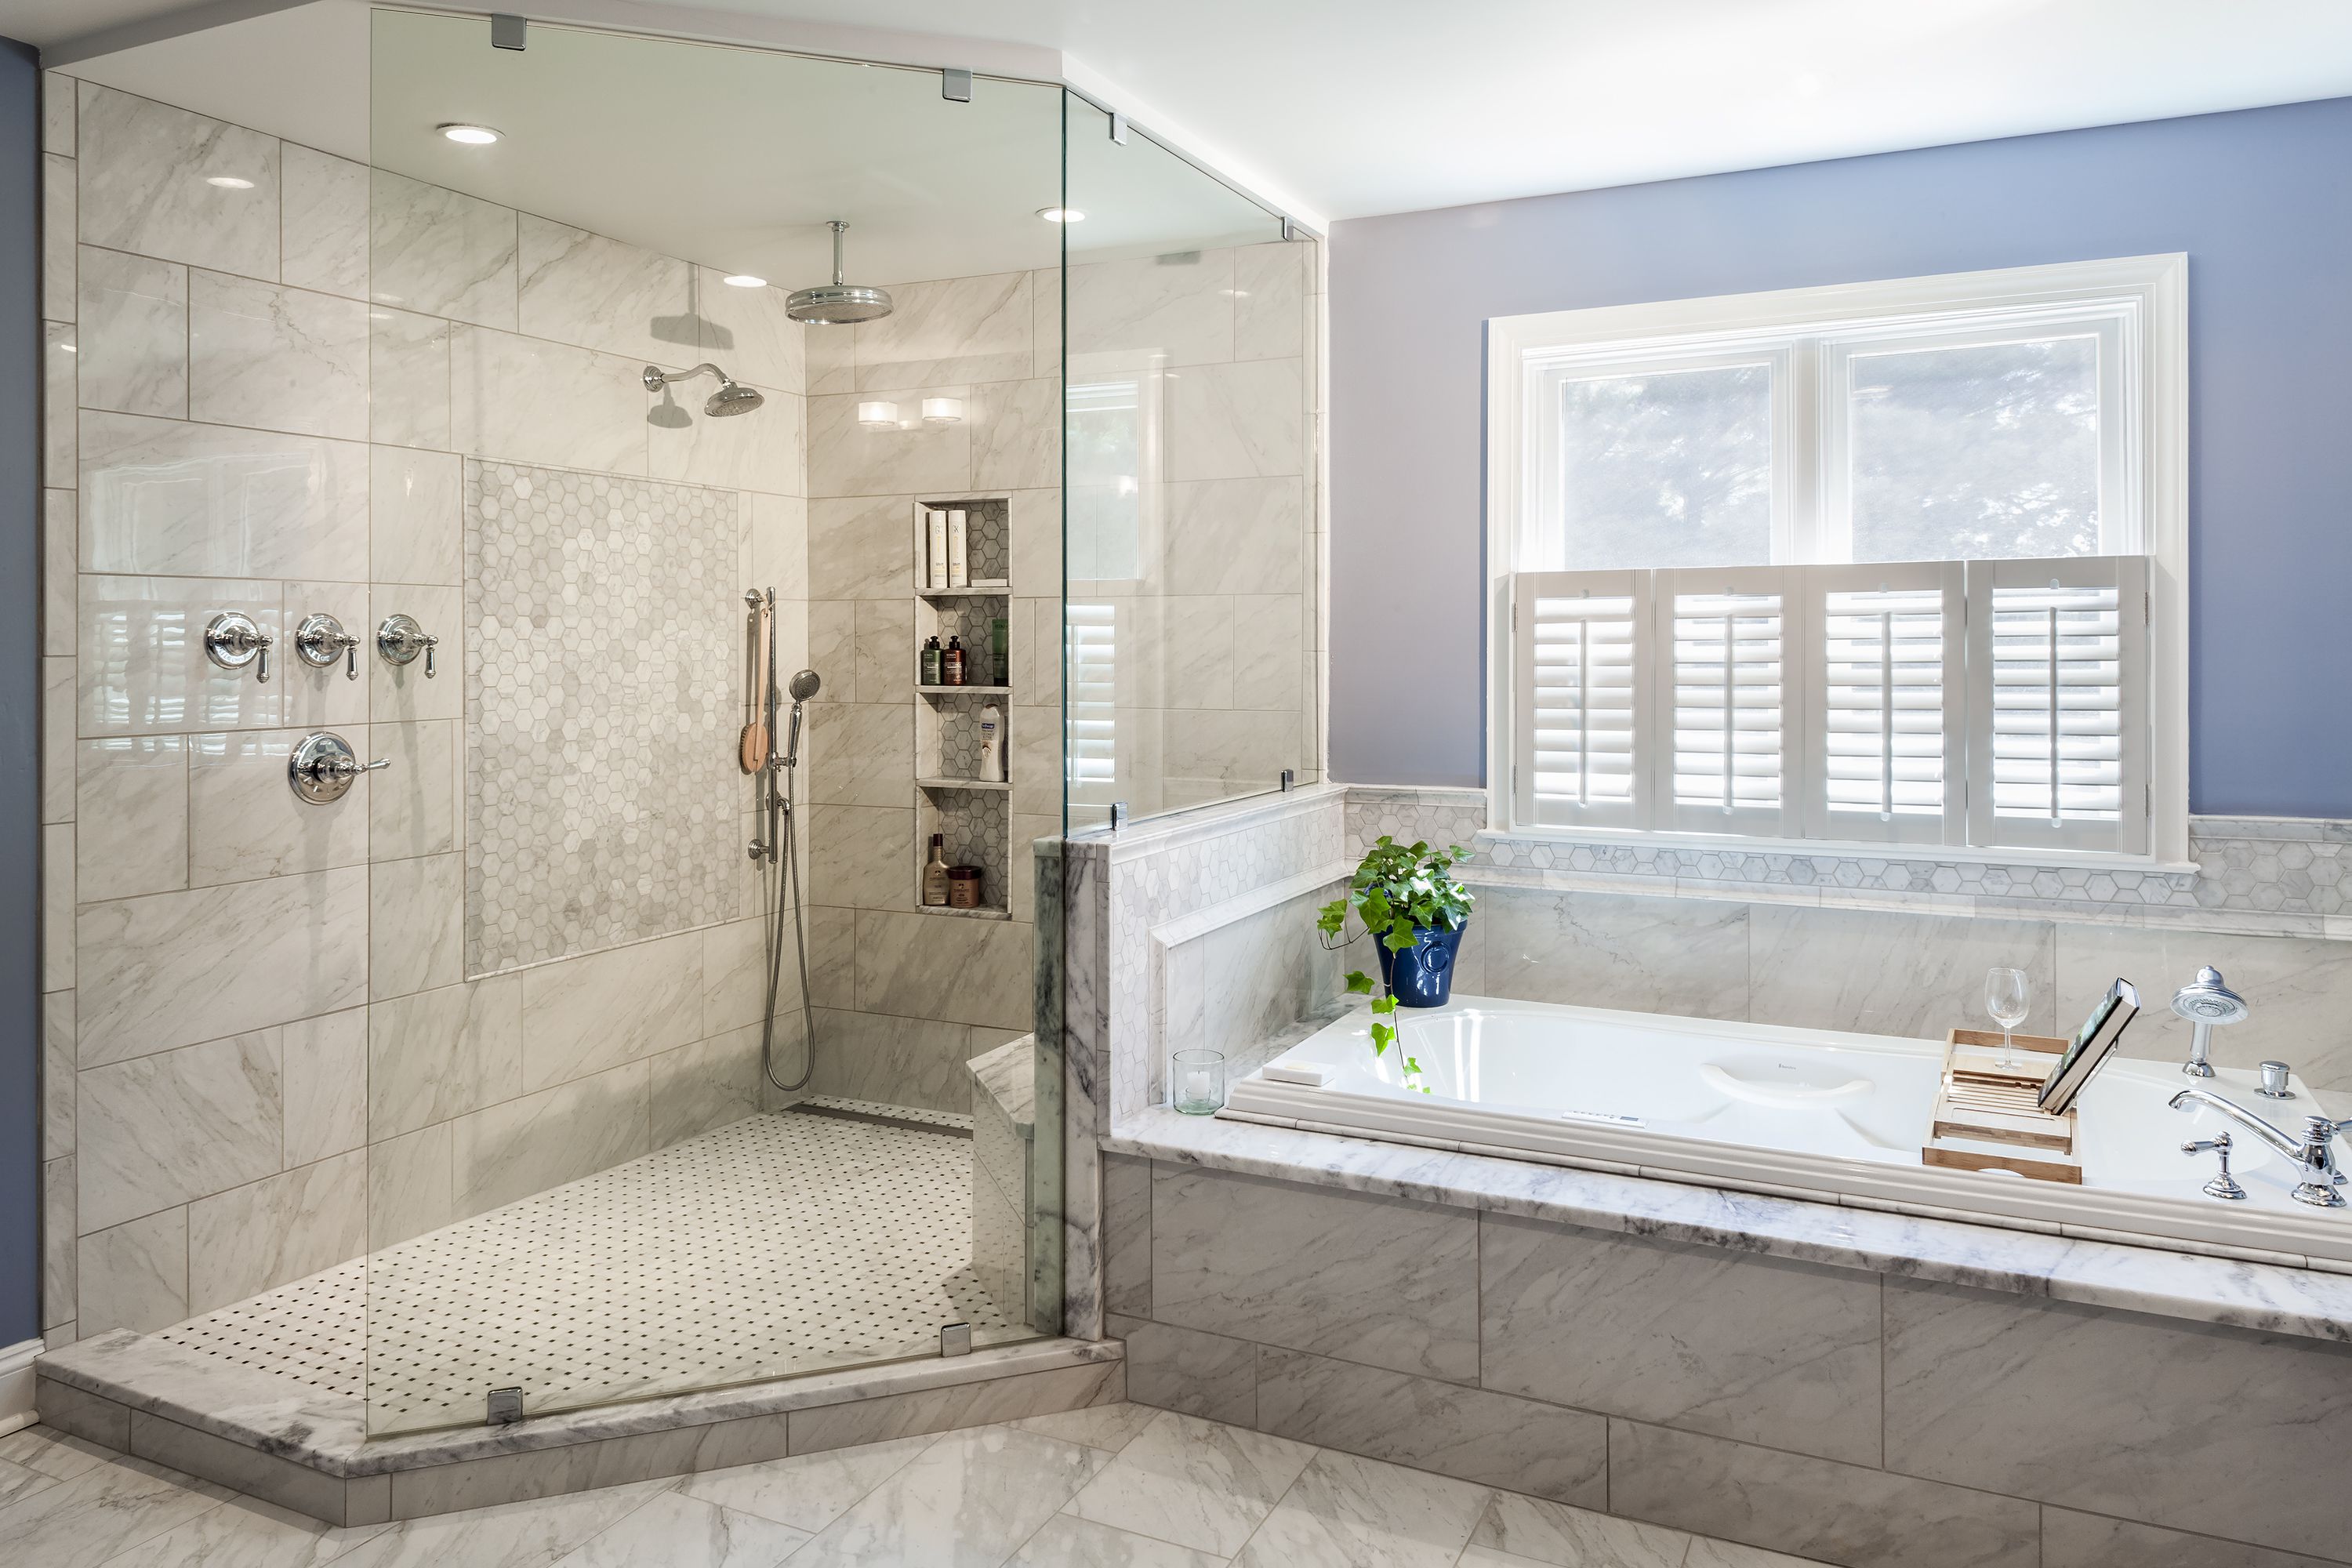 Determine Bathroom Renovation Cost, How Much Should A Small Bathroom Renovation Cost